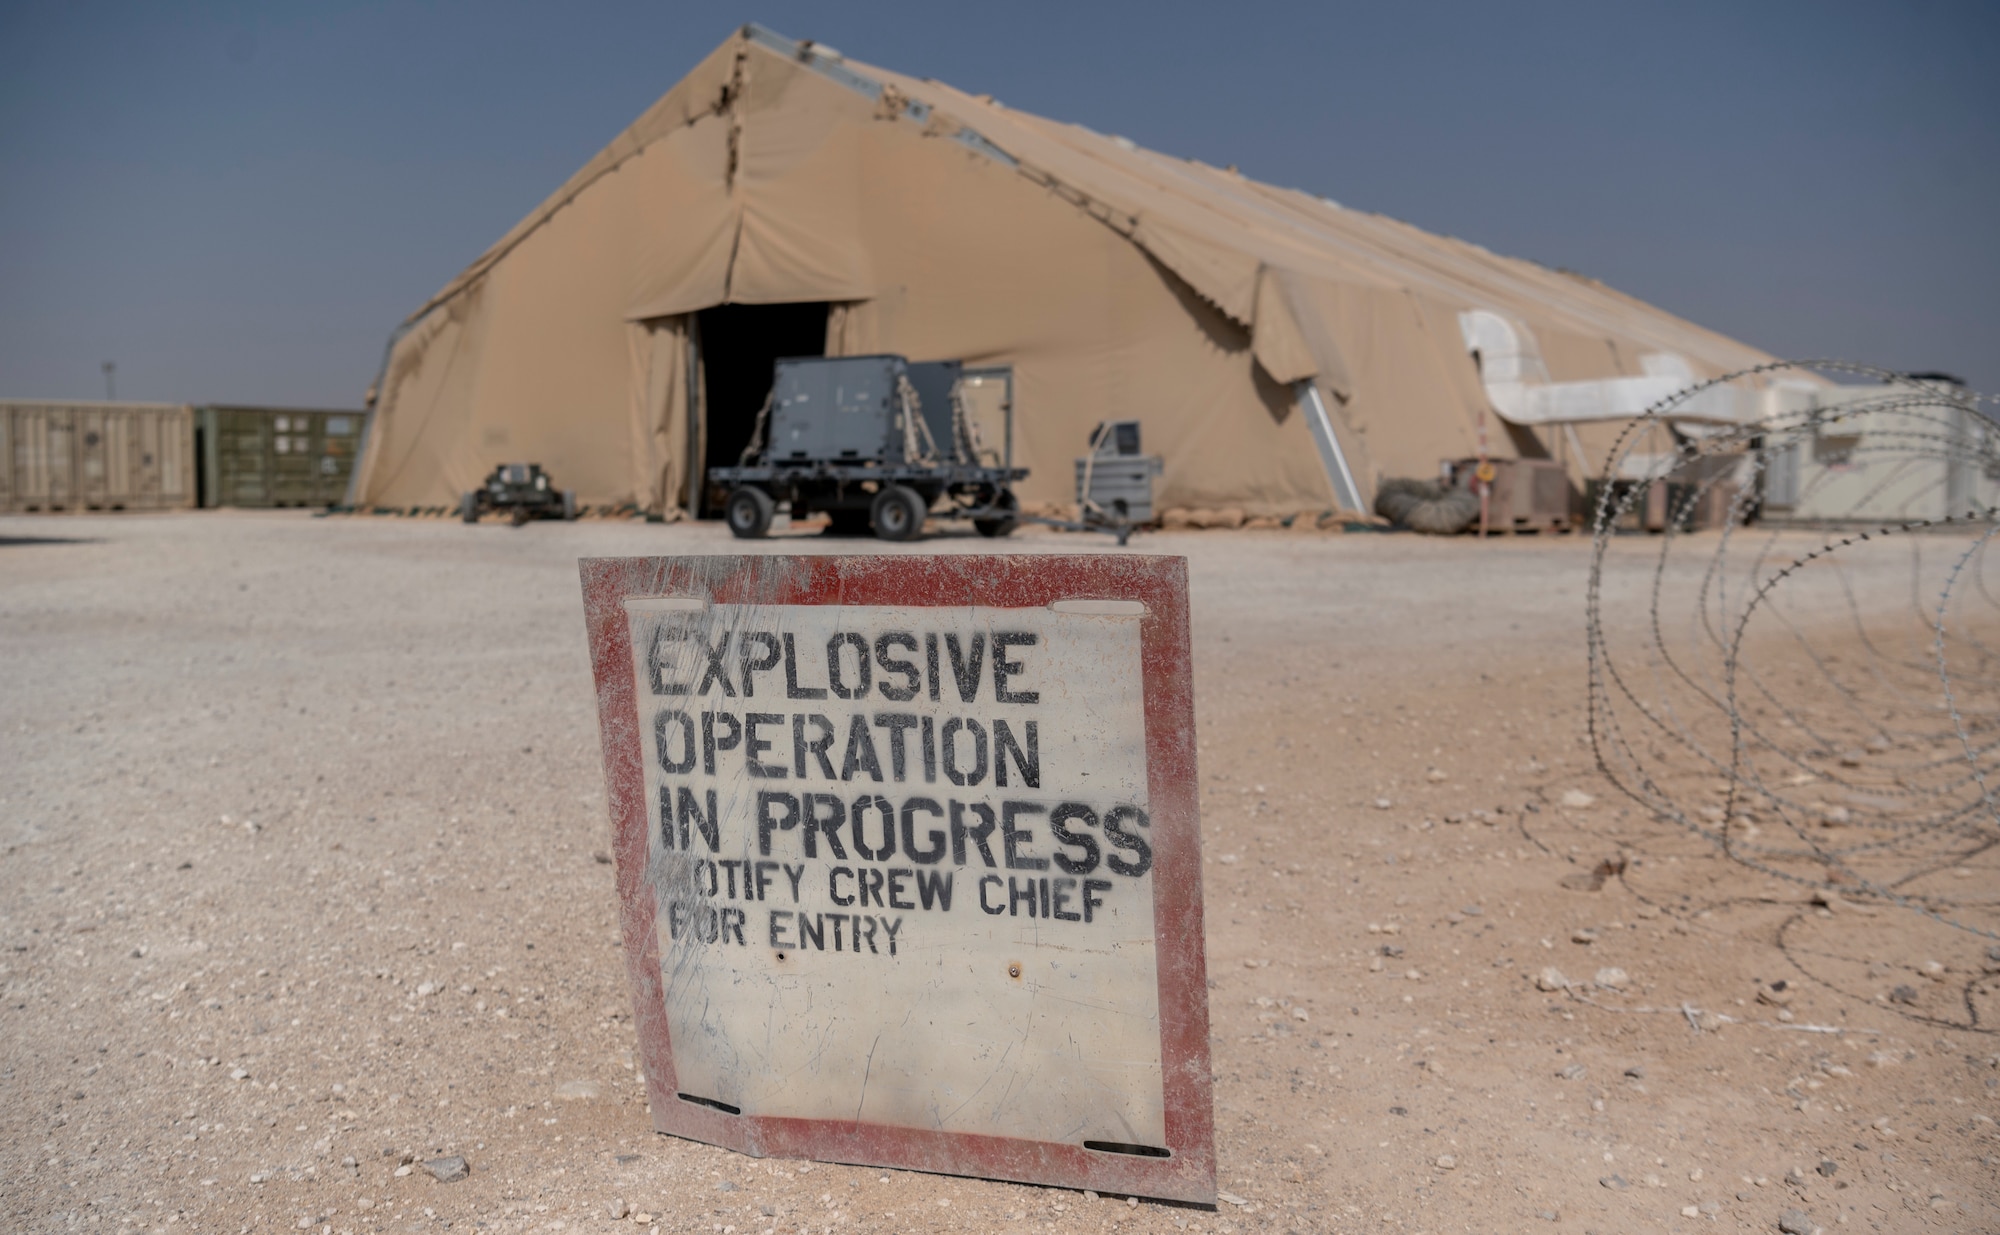 A sign in front of the Munitions facility, 332d Expeditionary Maintenance Squadron, Munitions Flight at an undisclosed location, Southwest Asia, Oct. 28, 2022. The sign warns against unauthorized entry, as the tent contains explosive materials. (U.S. Air Force photo by: Tech. Sgt. Jeffery Foster)